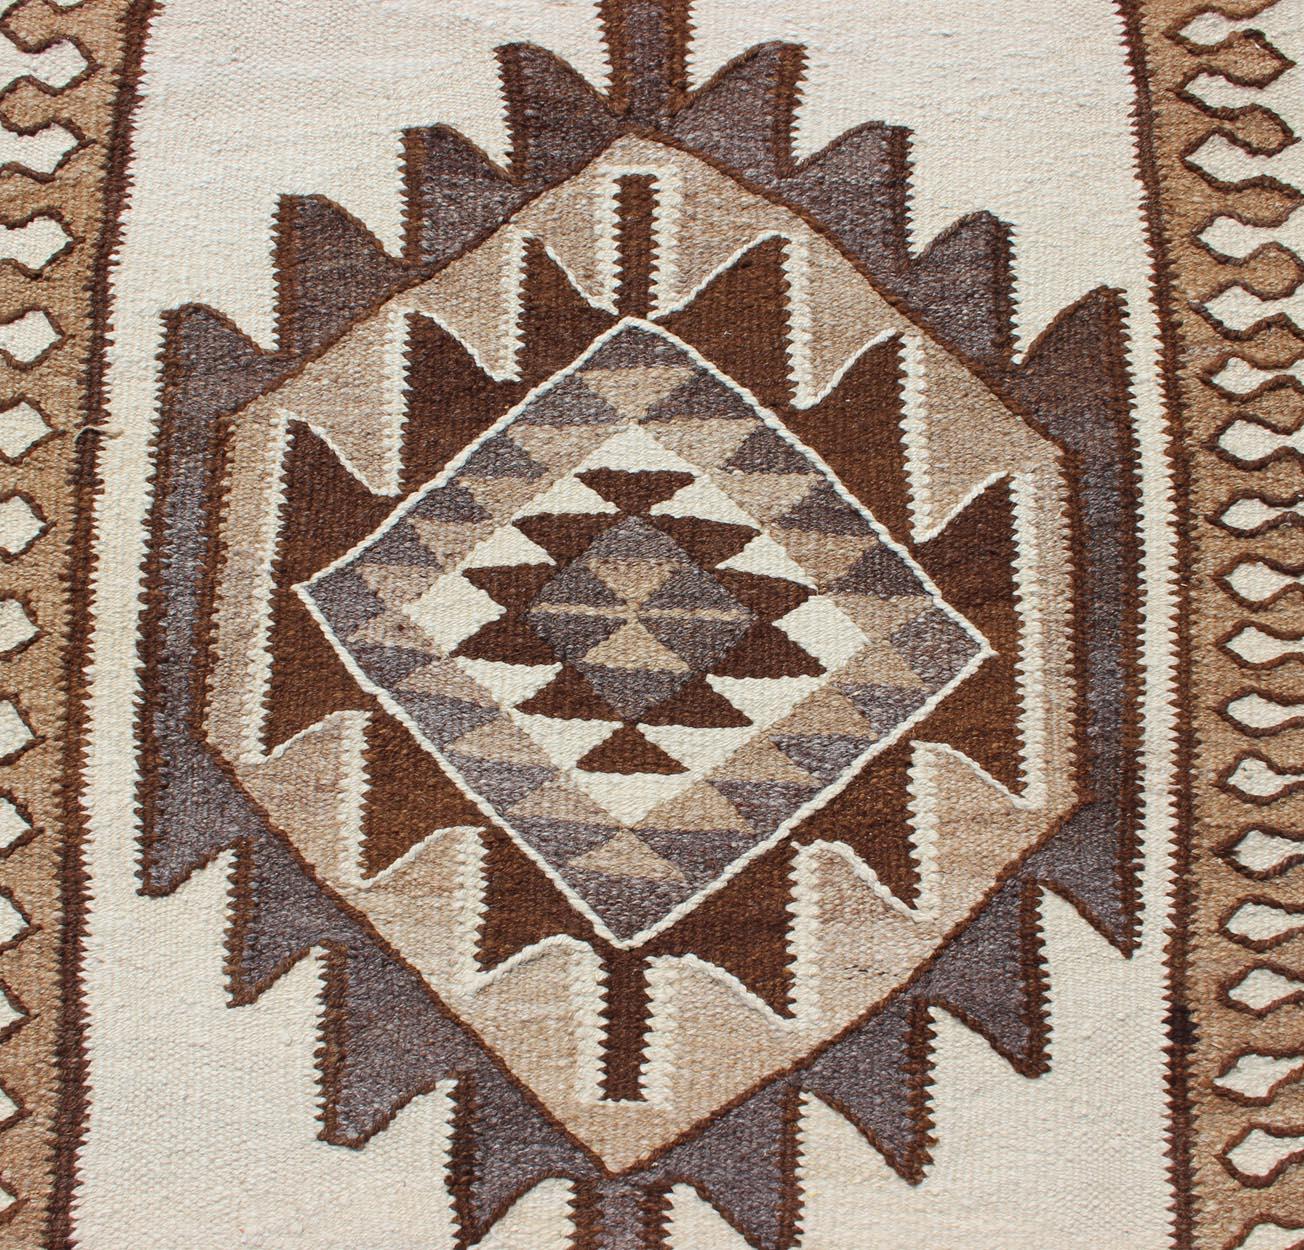 Vintage Turkish Kilim Runner with Tribal Medallions in Shades of Brown and Cream For Sale 3